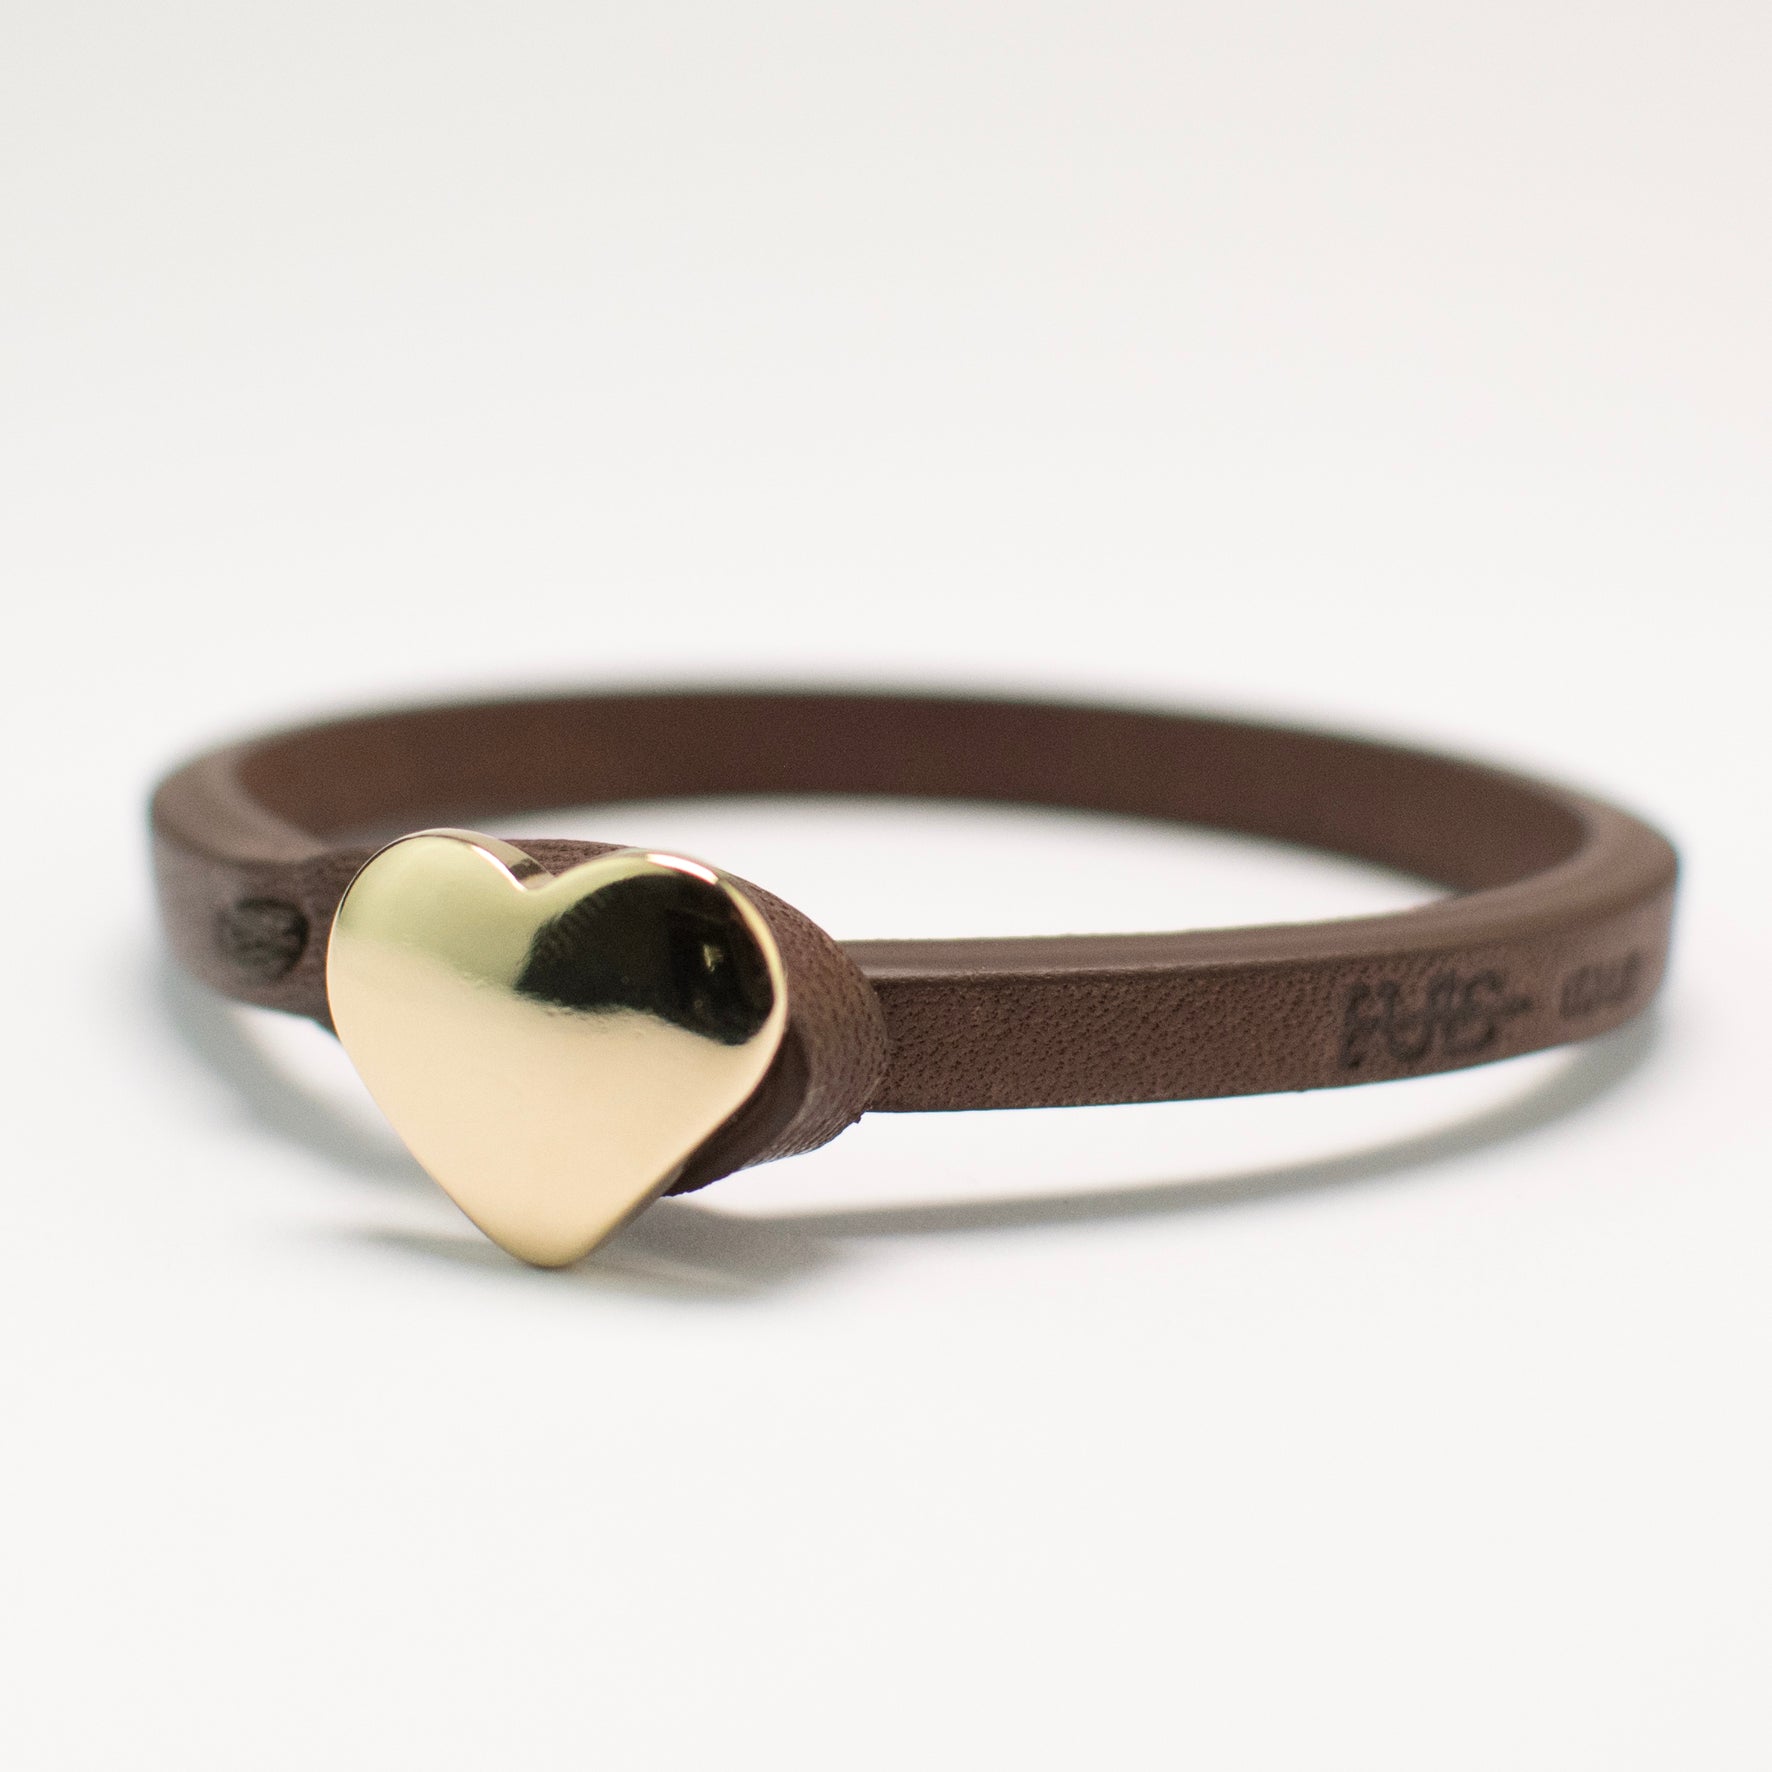 CUORE MIO BRACELET BROWN LEATHER BRASS-YELLOW GOLD